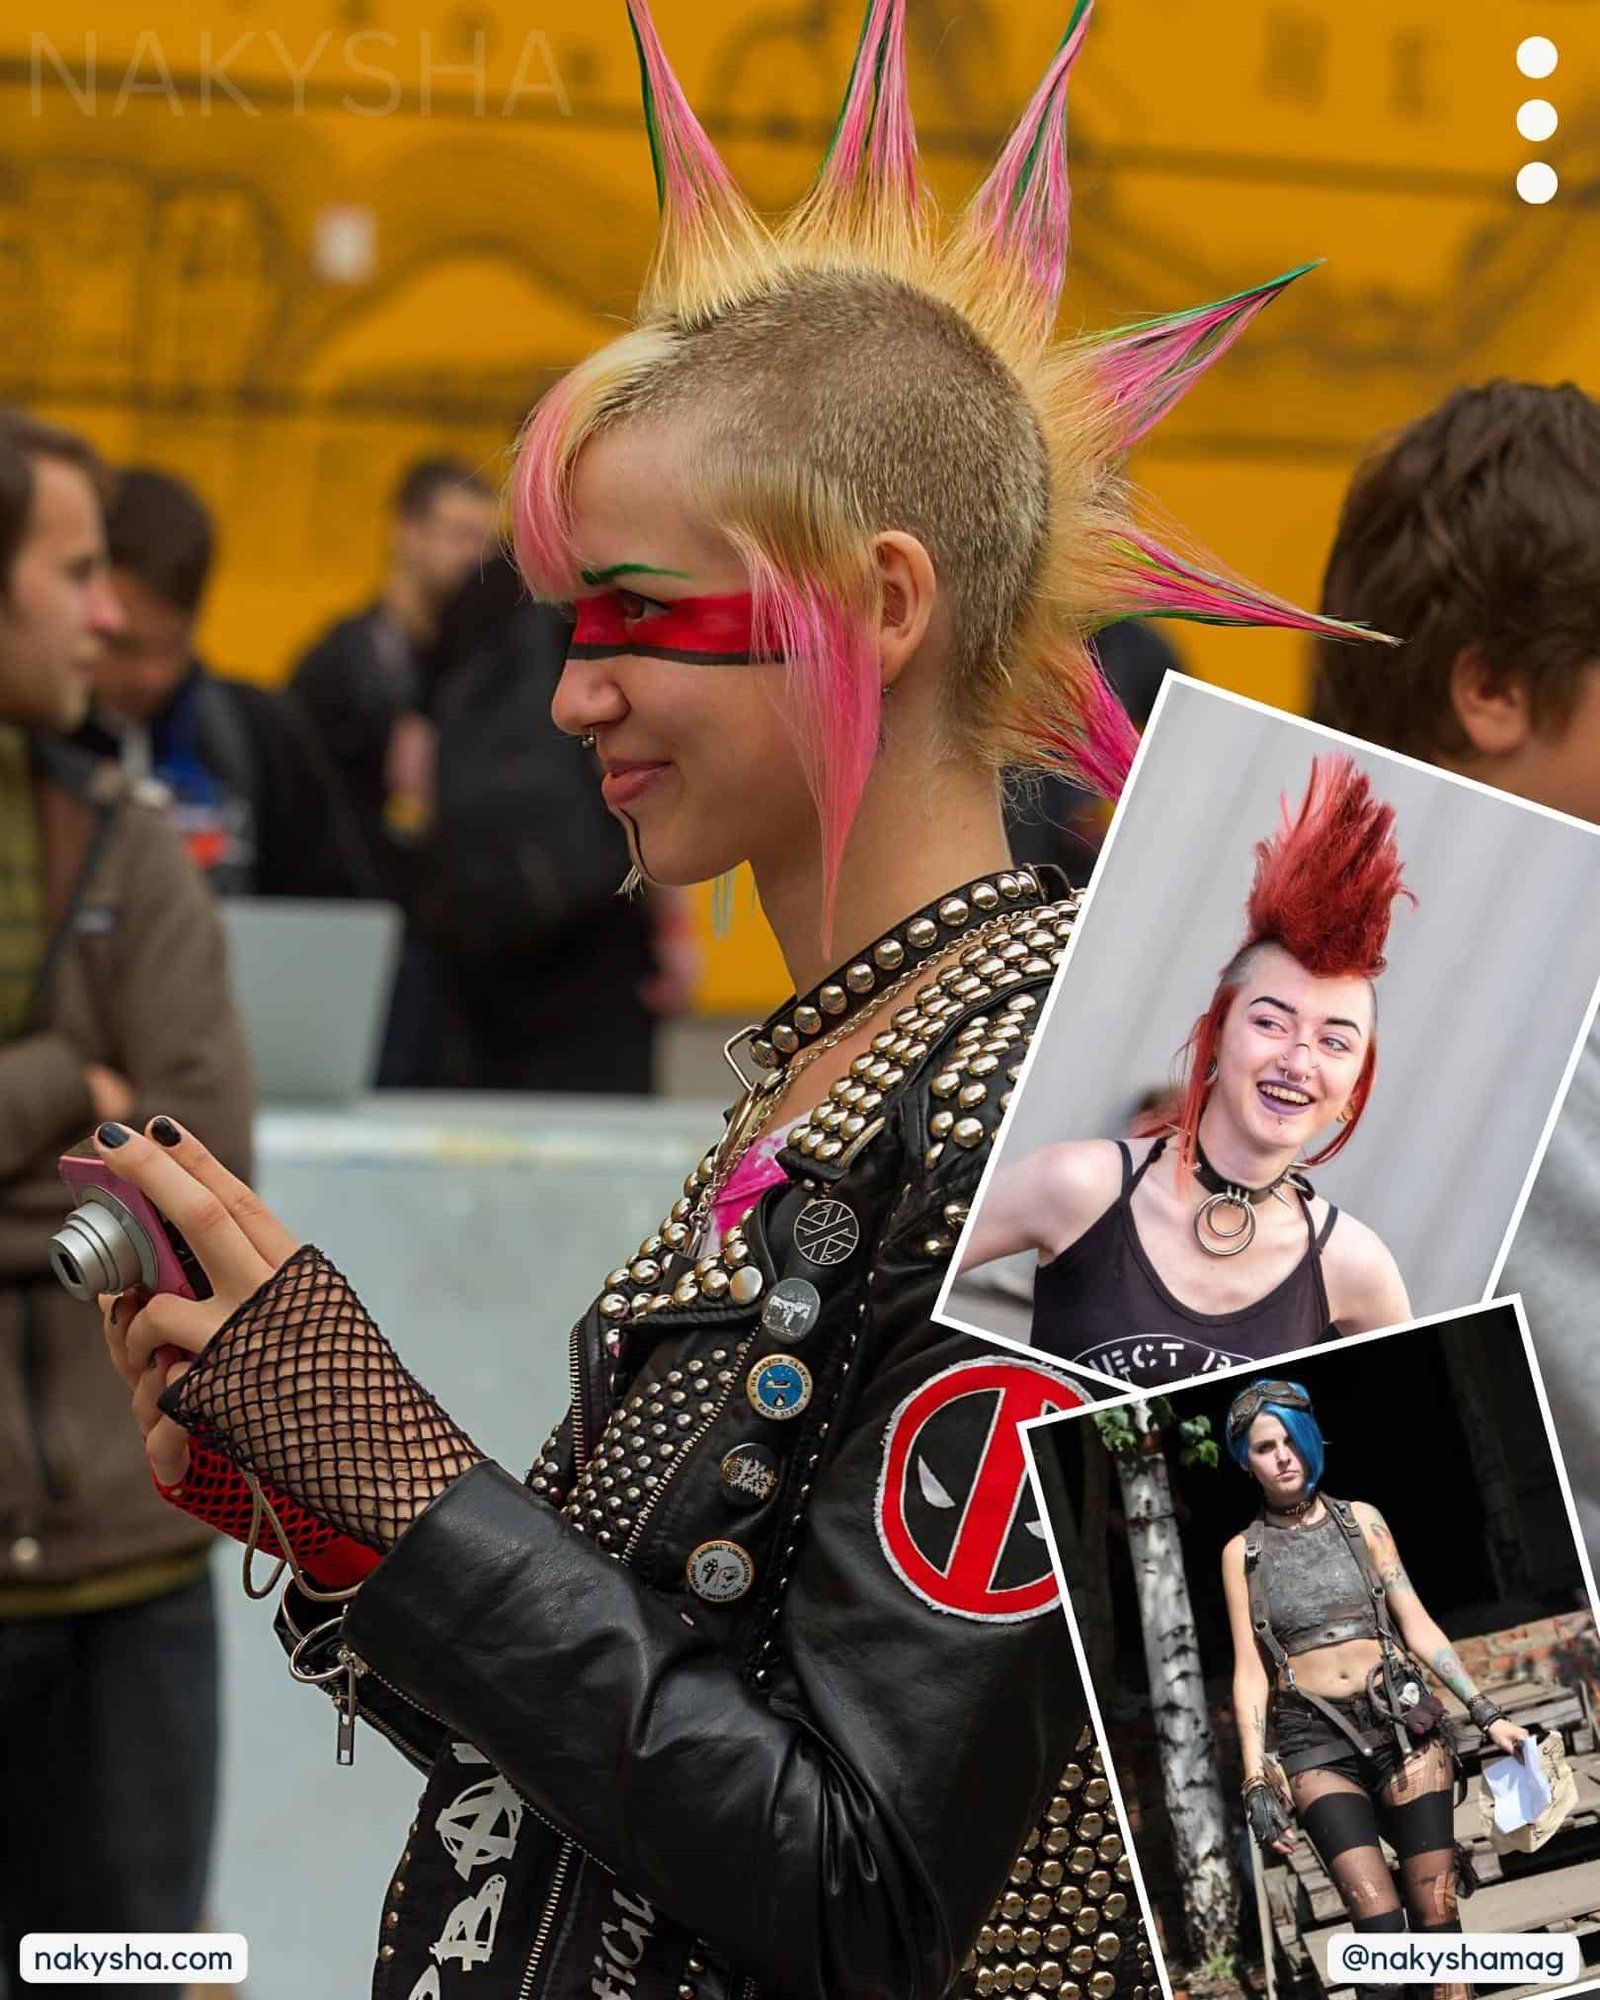 What is Punk Fashion